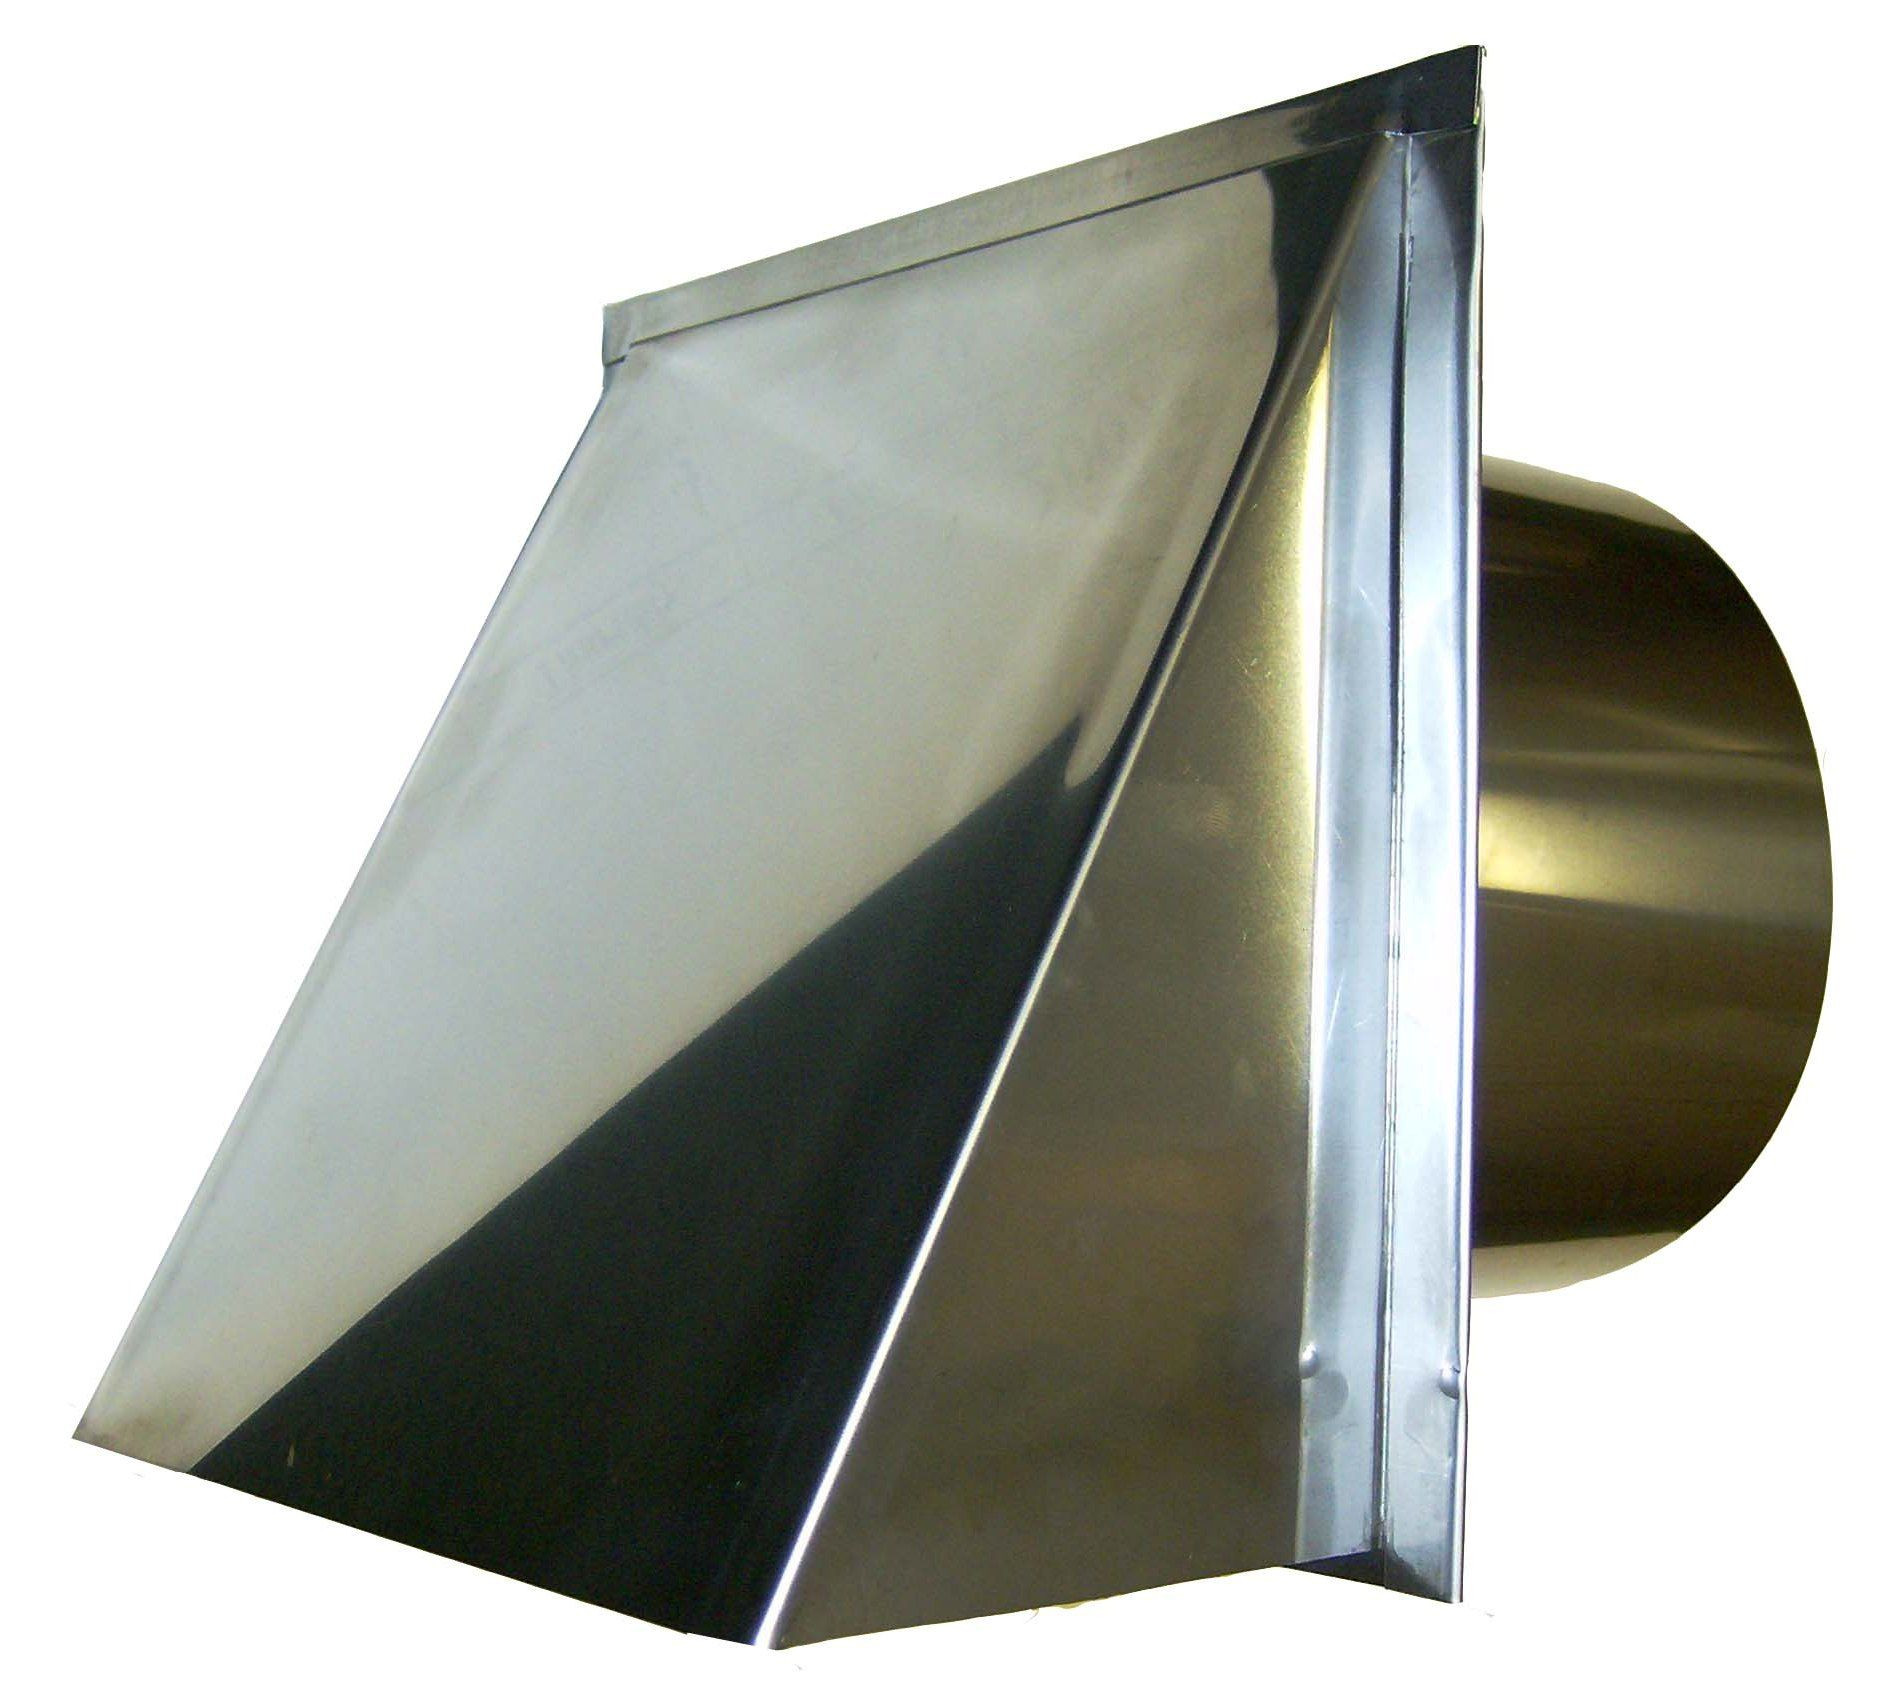 Bathroom Exhaust Fan Exterior Cover
 stainless outside cap With images